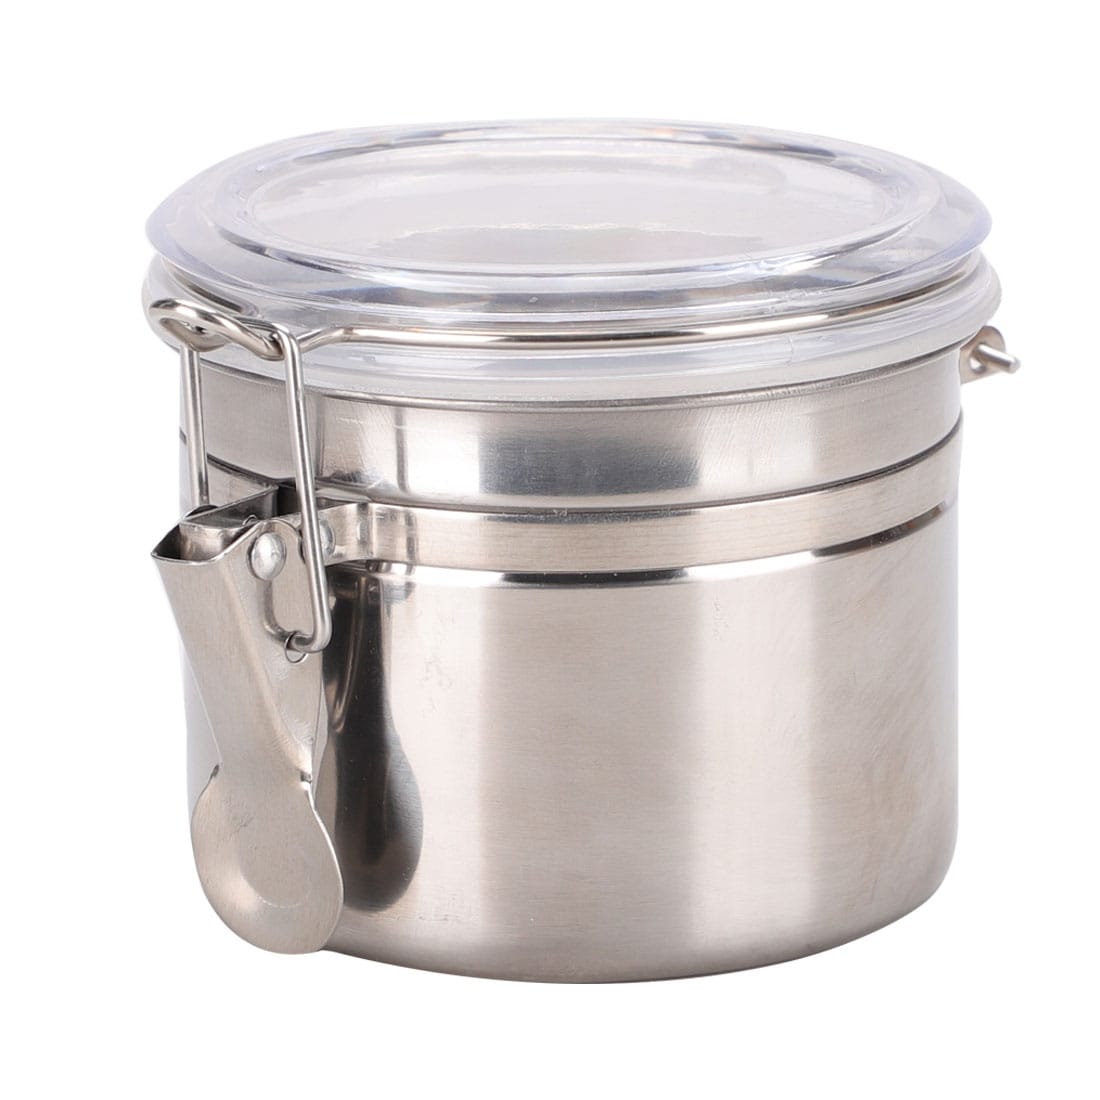 https://ak1.ostkcdn.com/images/products/is/images/direct/9fd6f10e1ef5474cd267c1212cb7c6150aa7ca9b/Stainless-Steel-Airtight-Canister-Food-Container.jpg